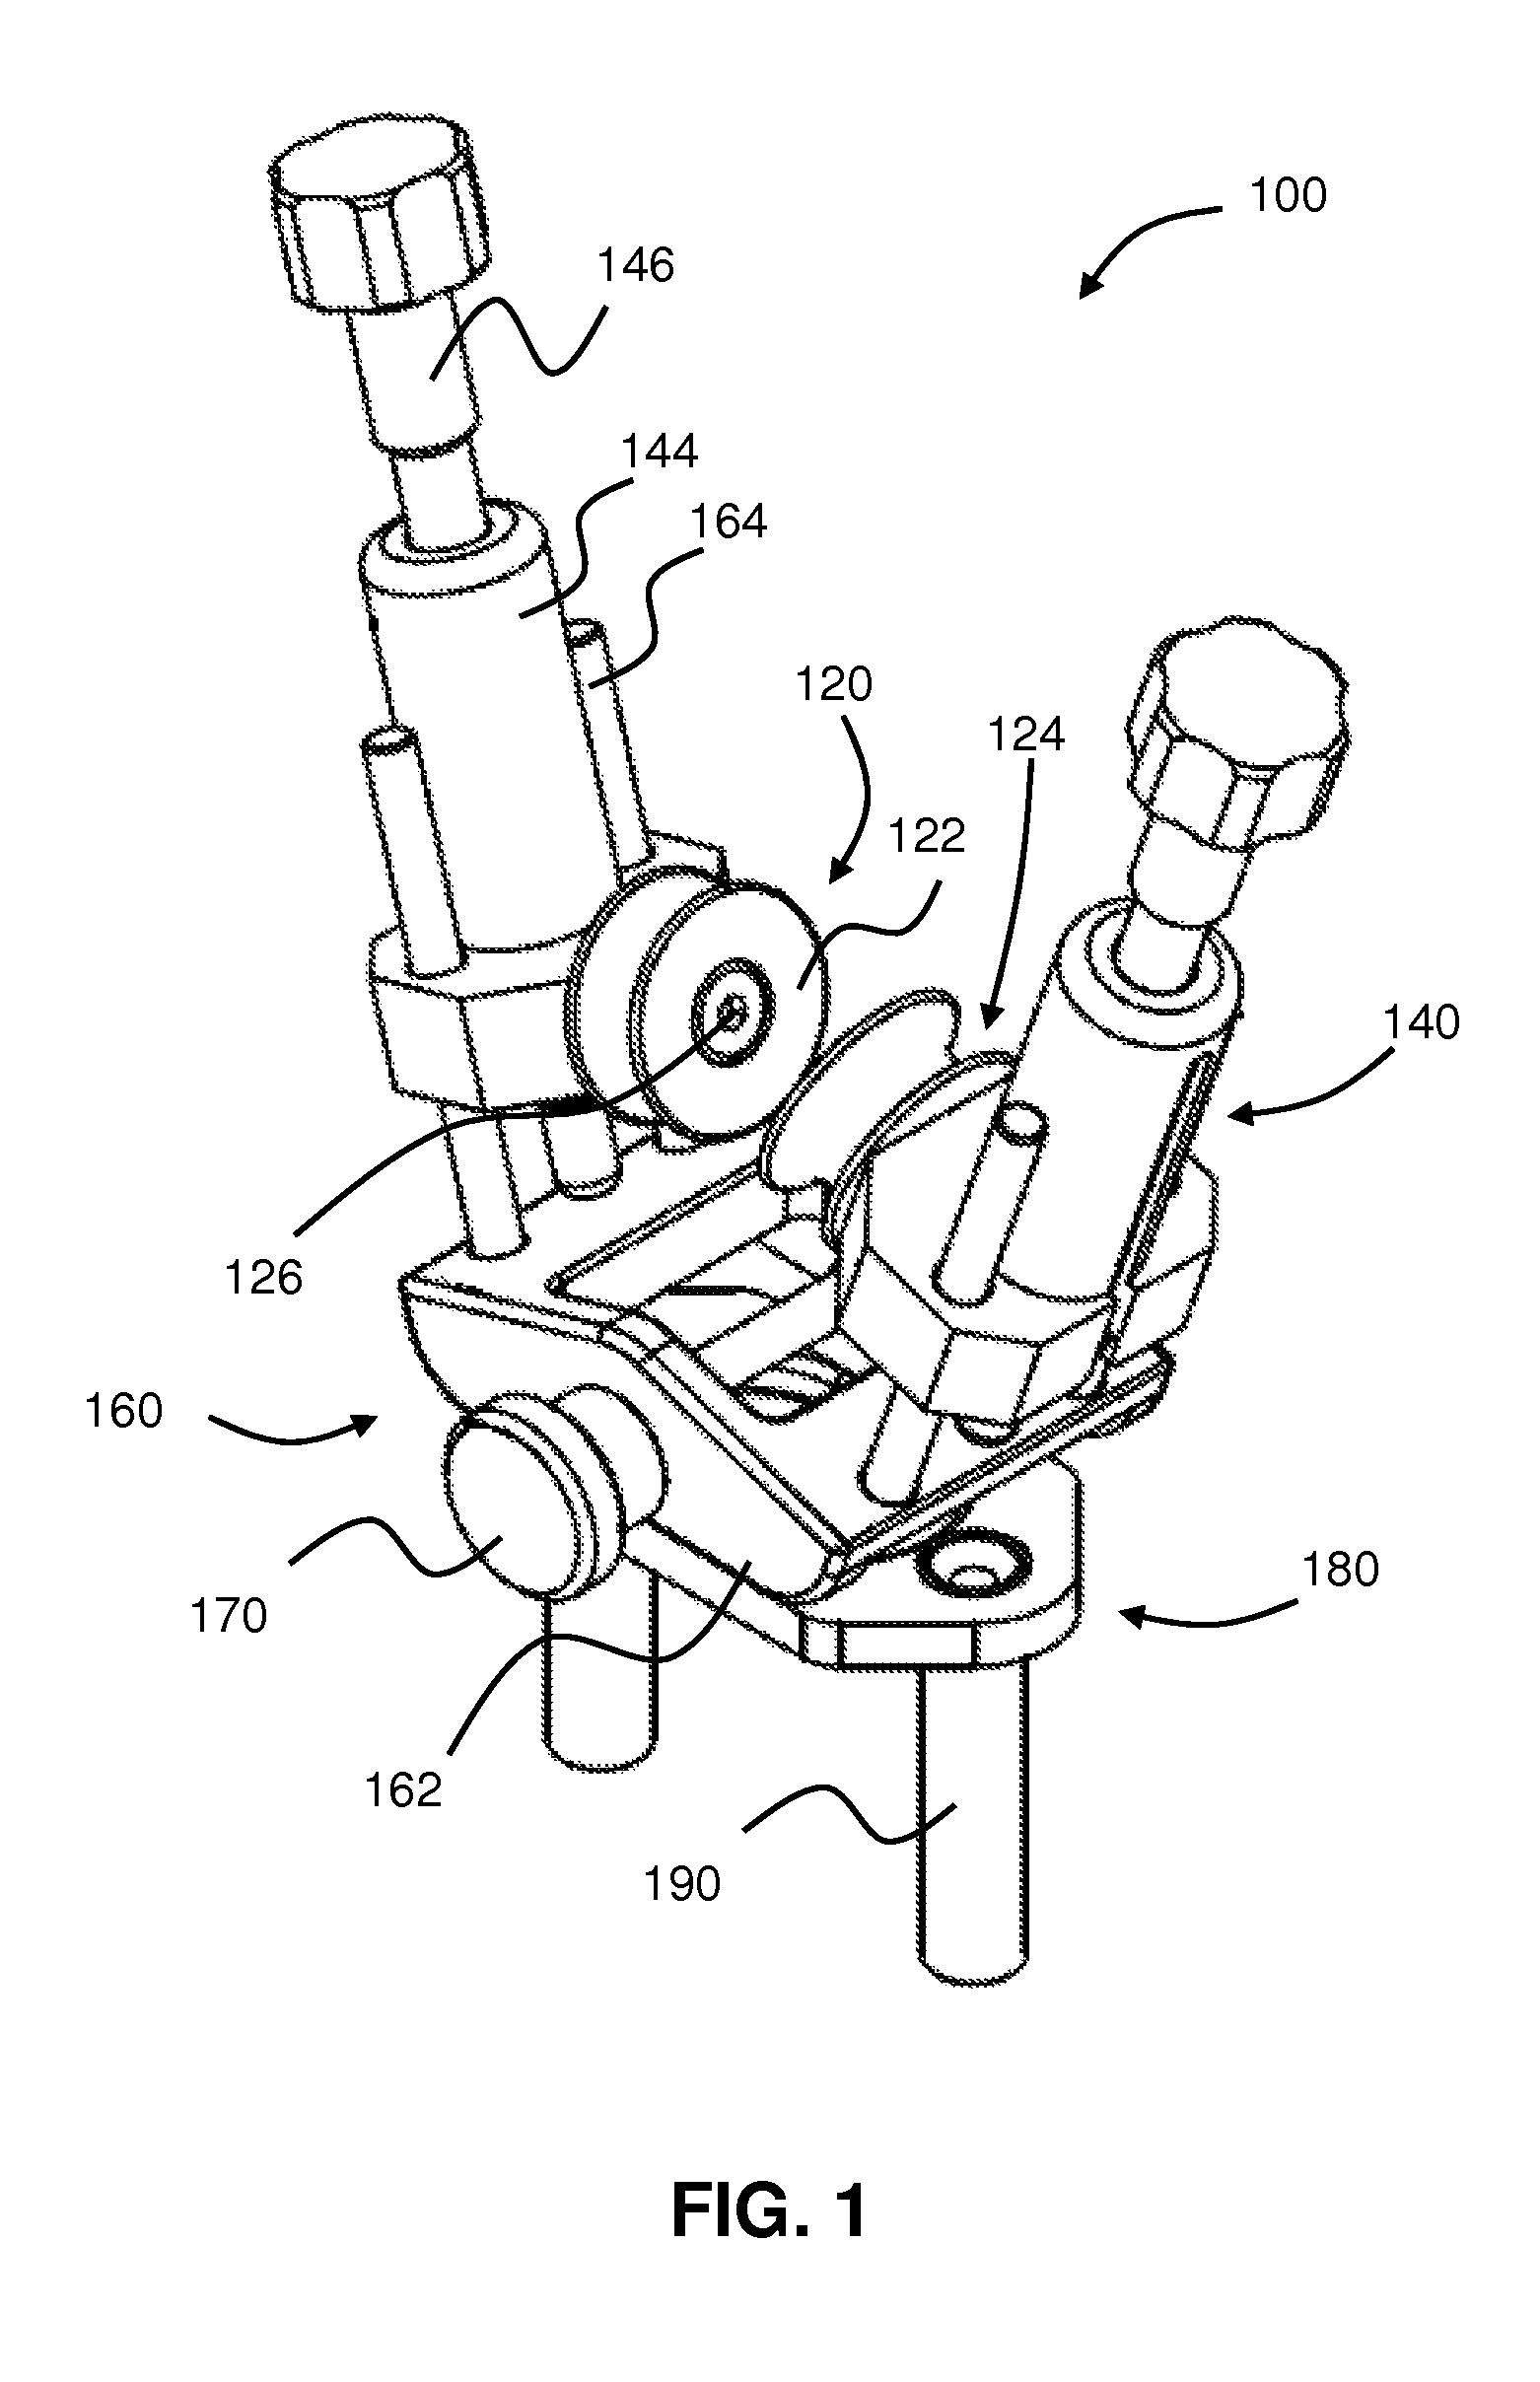 Surgical tensioning assembly and methods of use